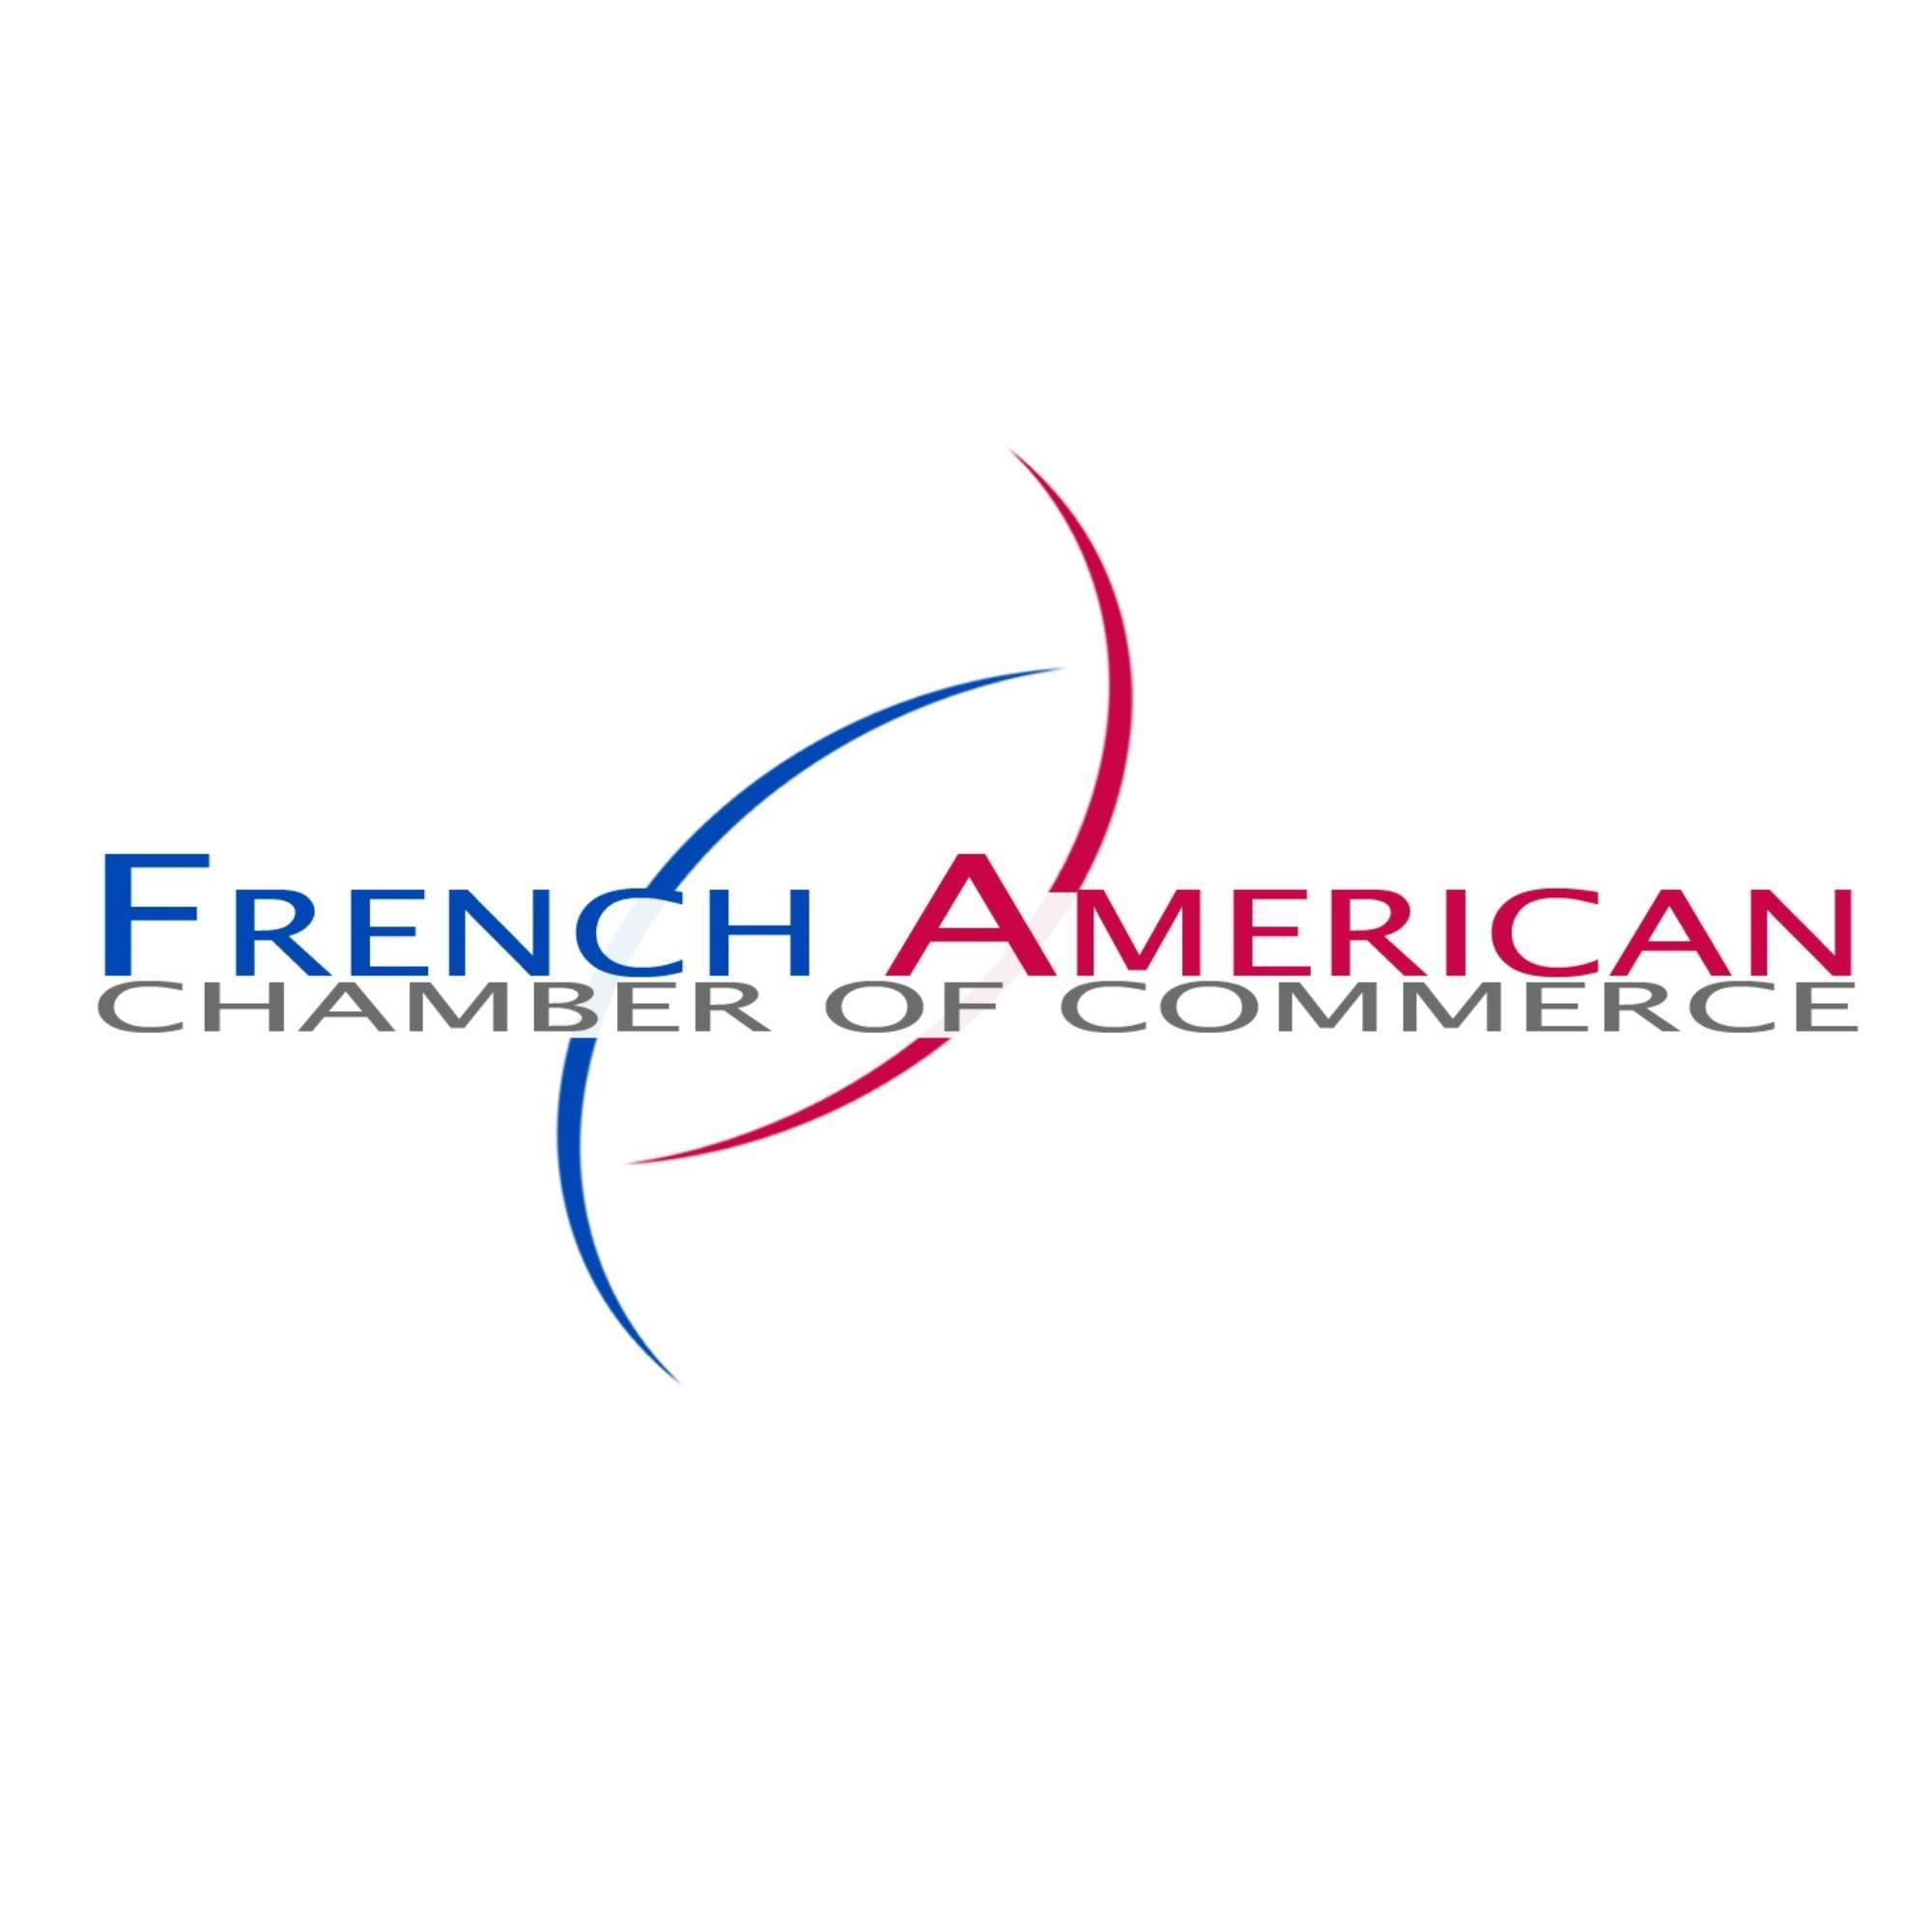 French-American Chamber of Commerce- D.C.